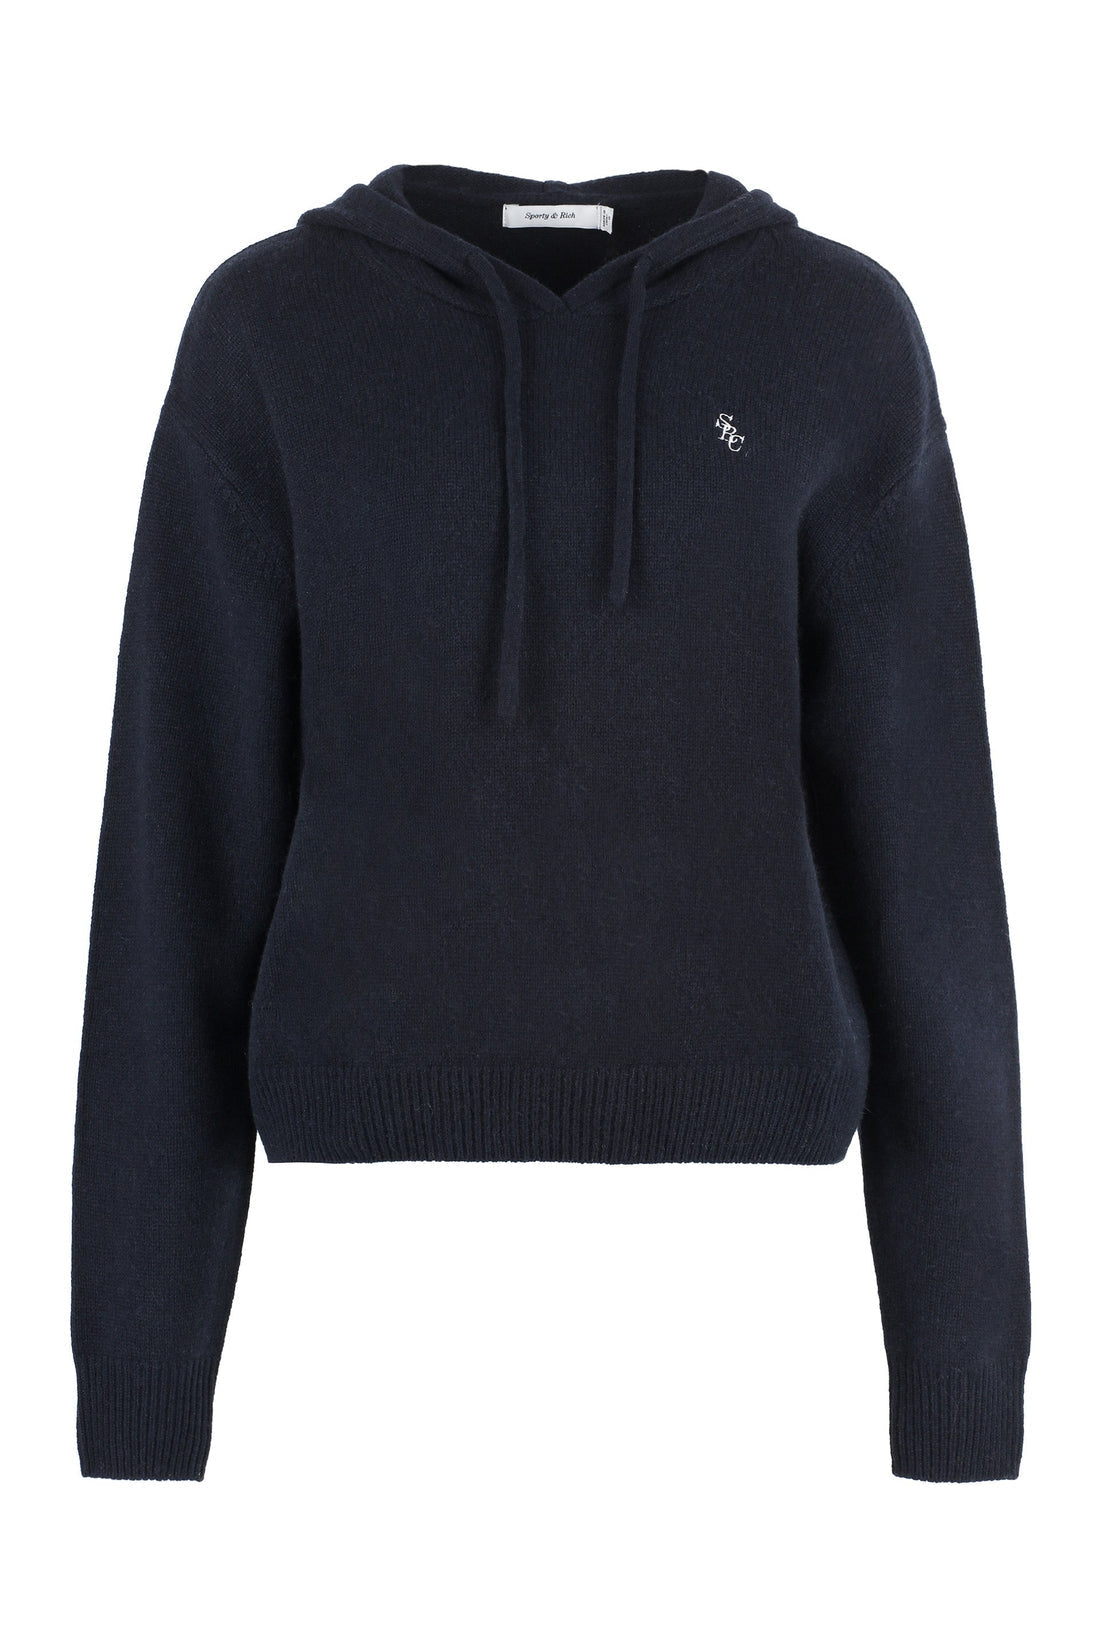 Sporty & Rich-OUTLET-SALE-Knitted hoodie-ARCHIVIST